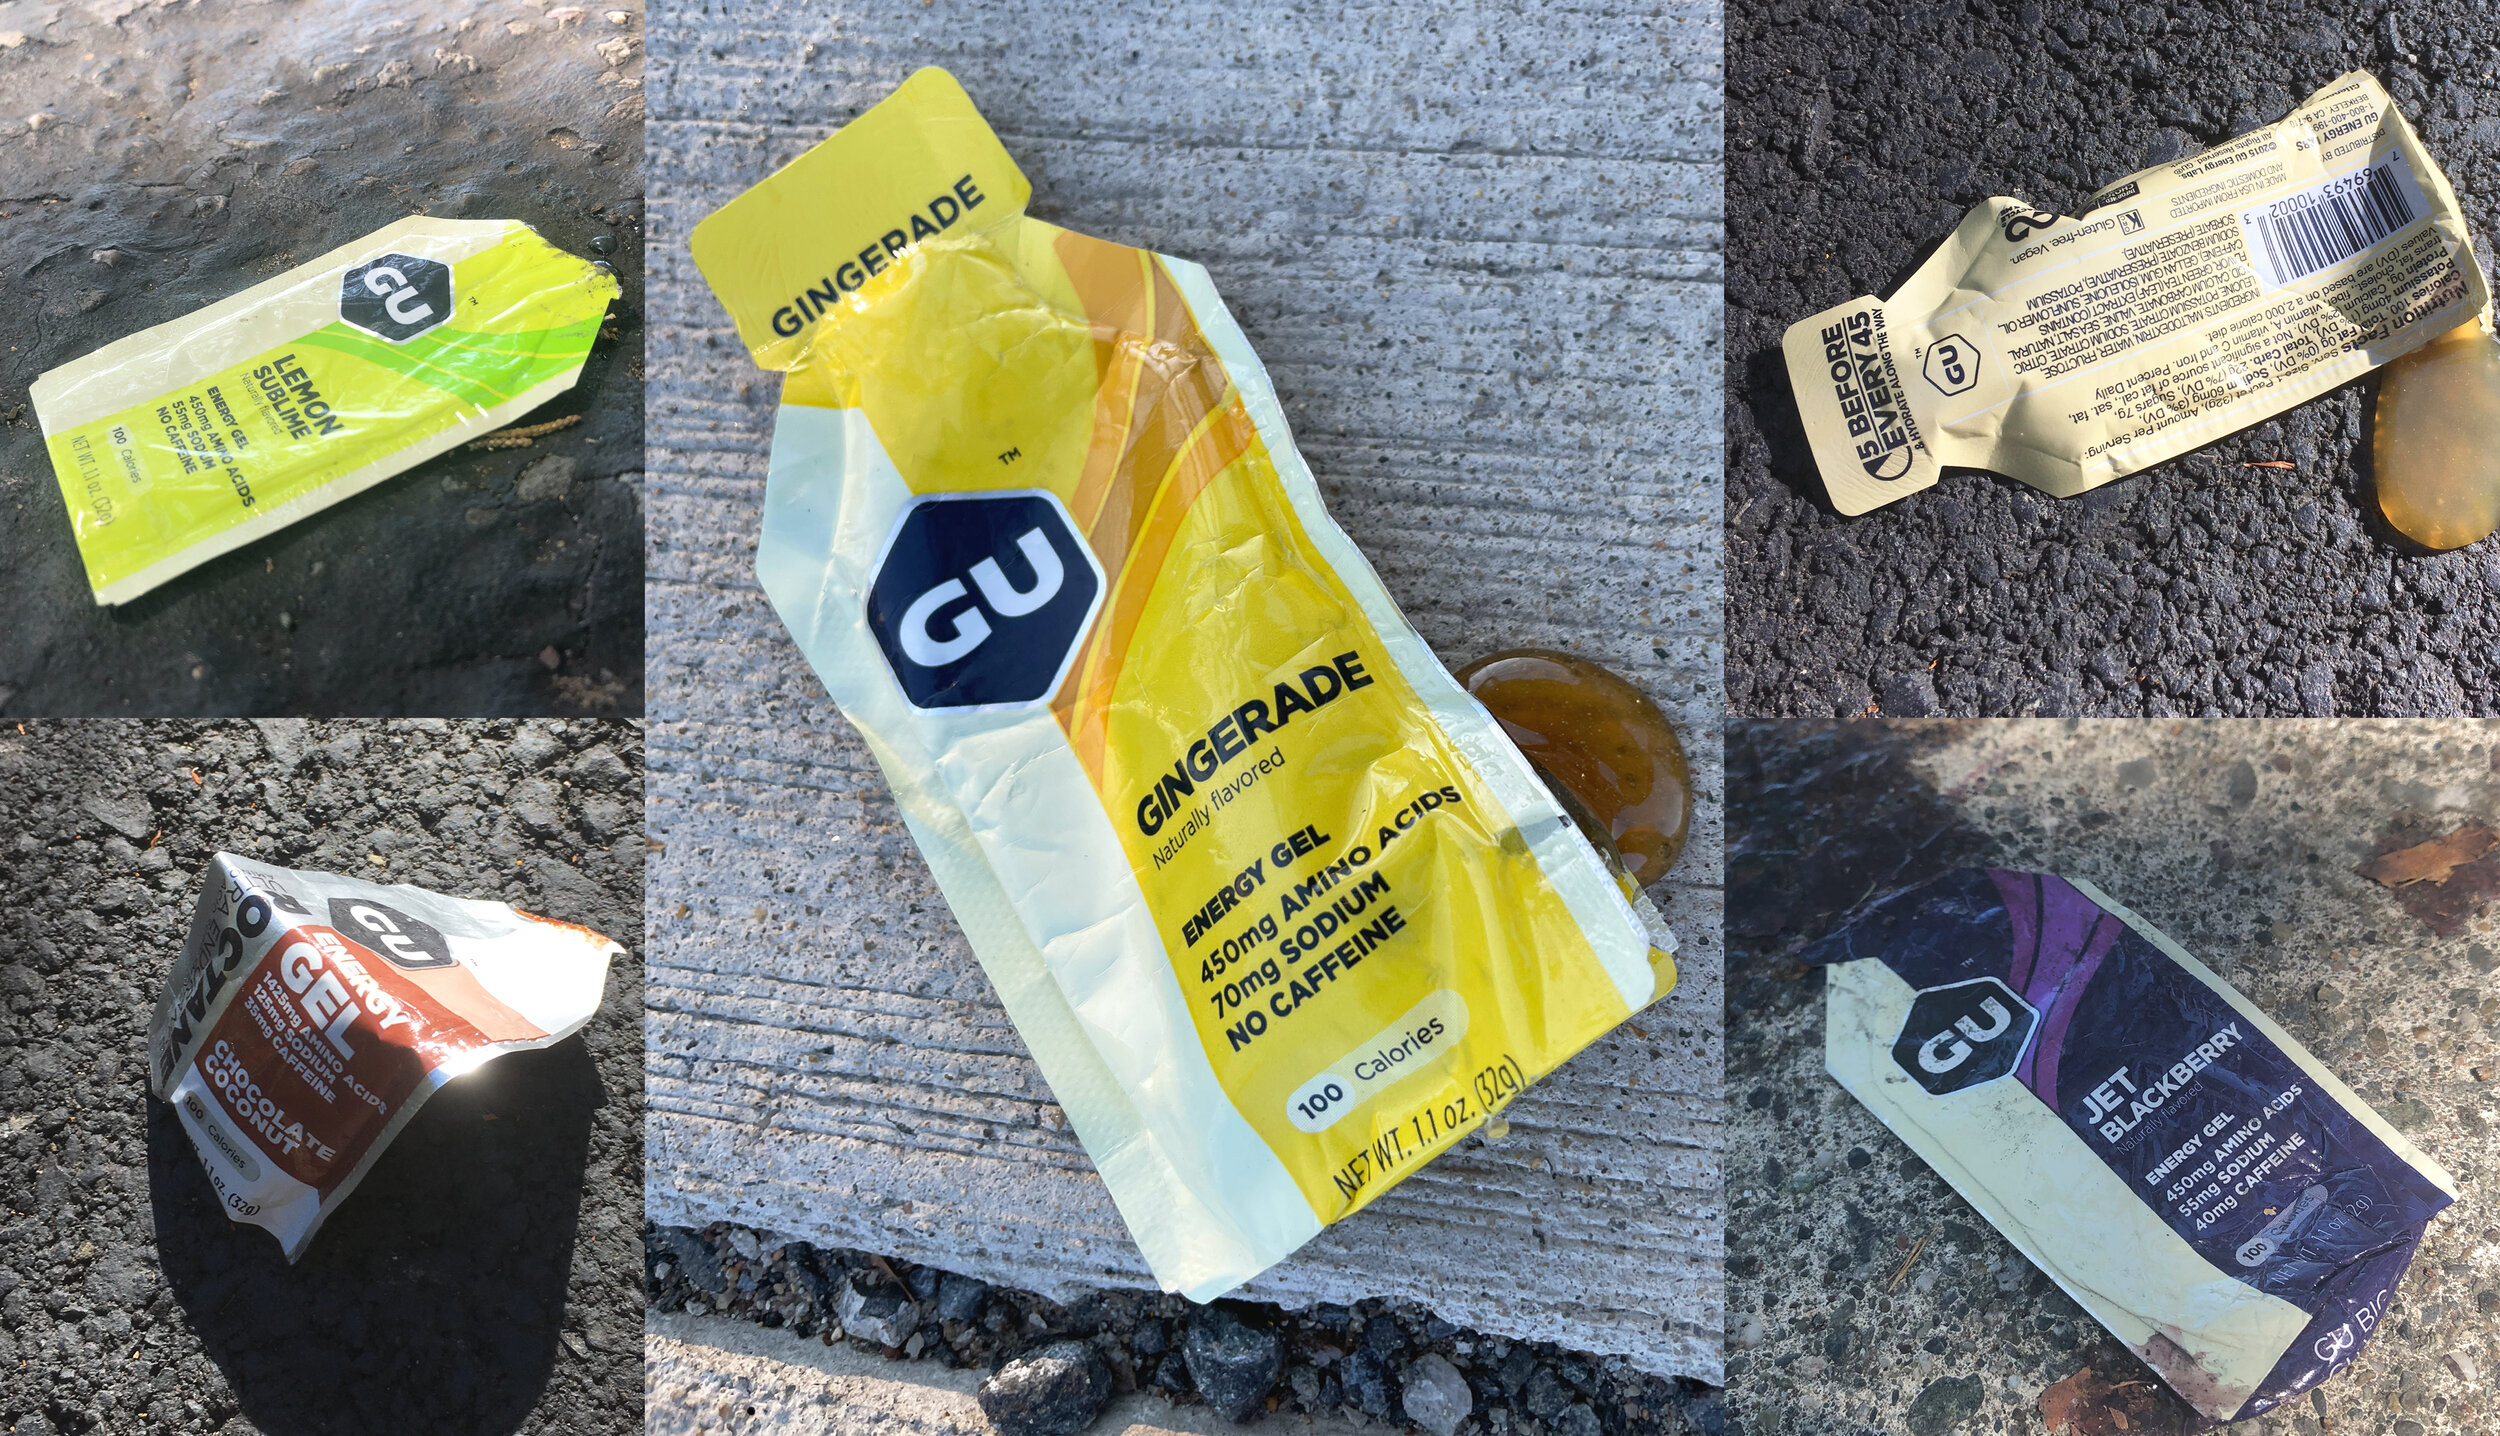  littered gel packets spotted around the US.  